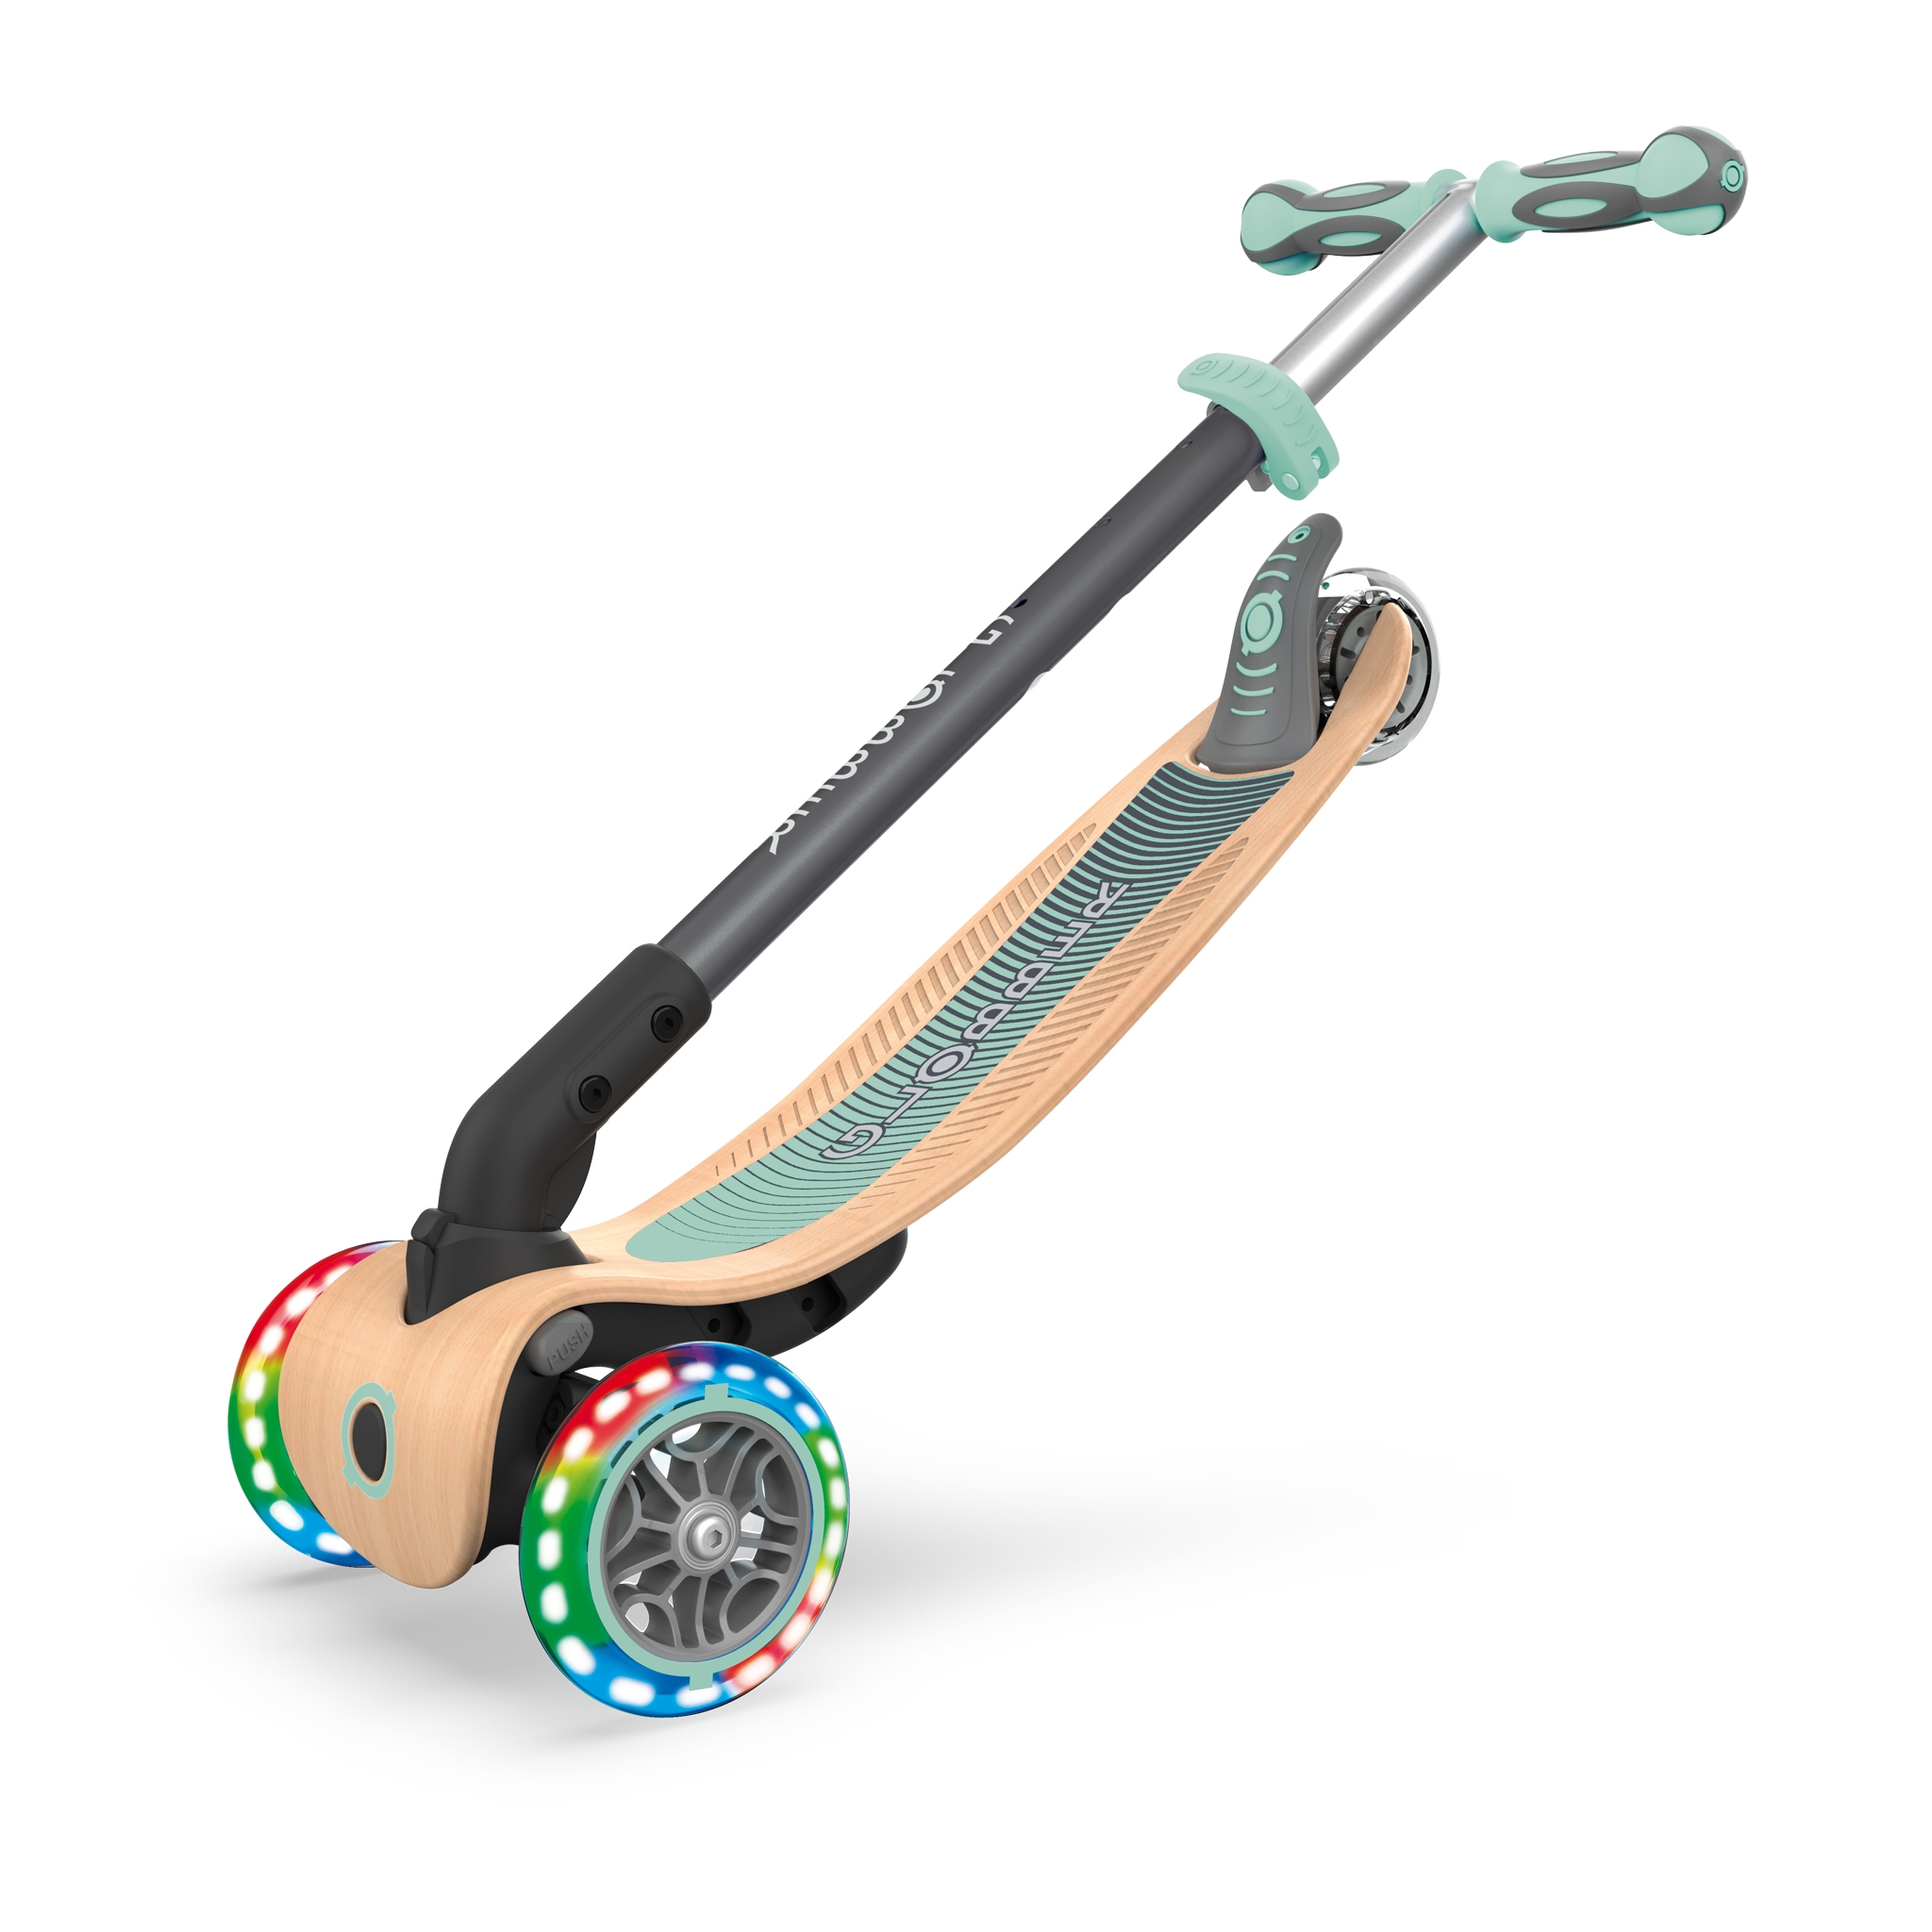 Globber-PRIMO-FOLDABLE-WOOD-LIGHTS-3-wheel-foldable-light-up-scooter-with-7-ply-wooden-scooter-deck-trolley-mode-compatible 5